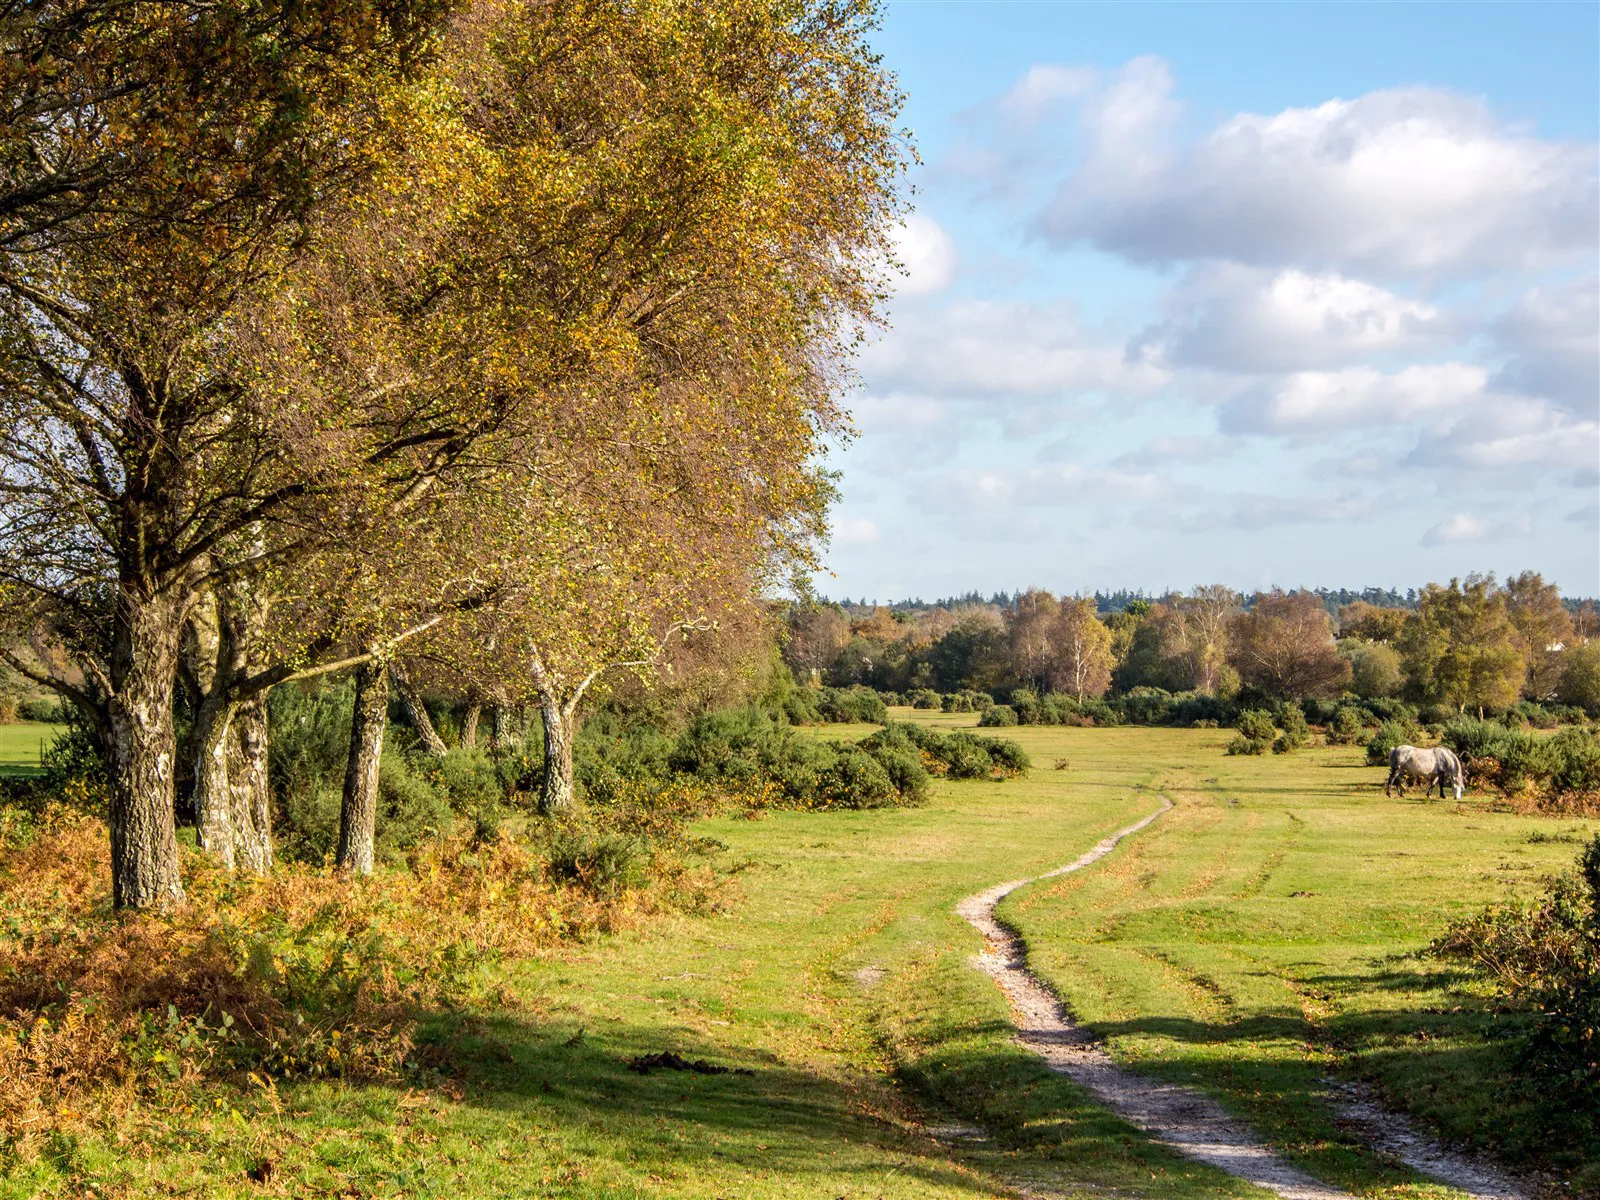 7 secrets to getting the most out of New Forest camping